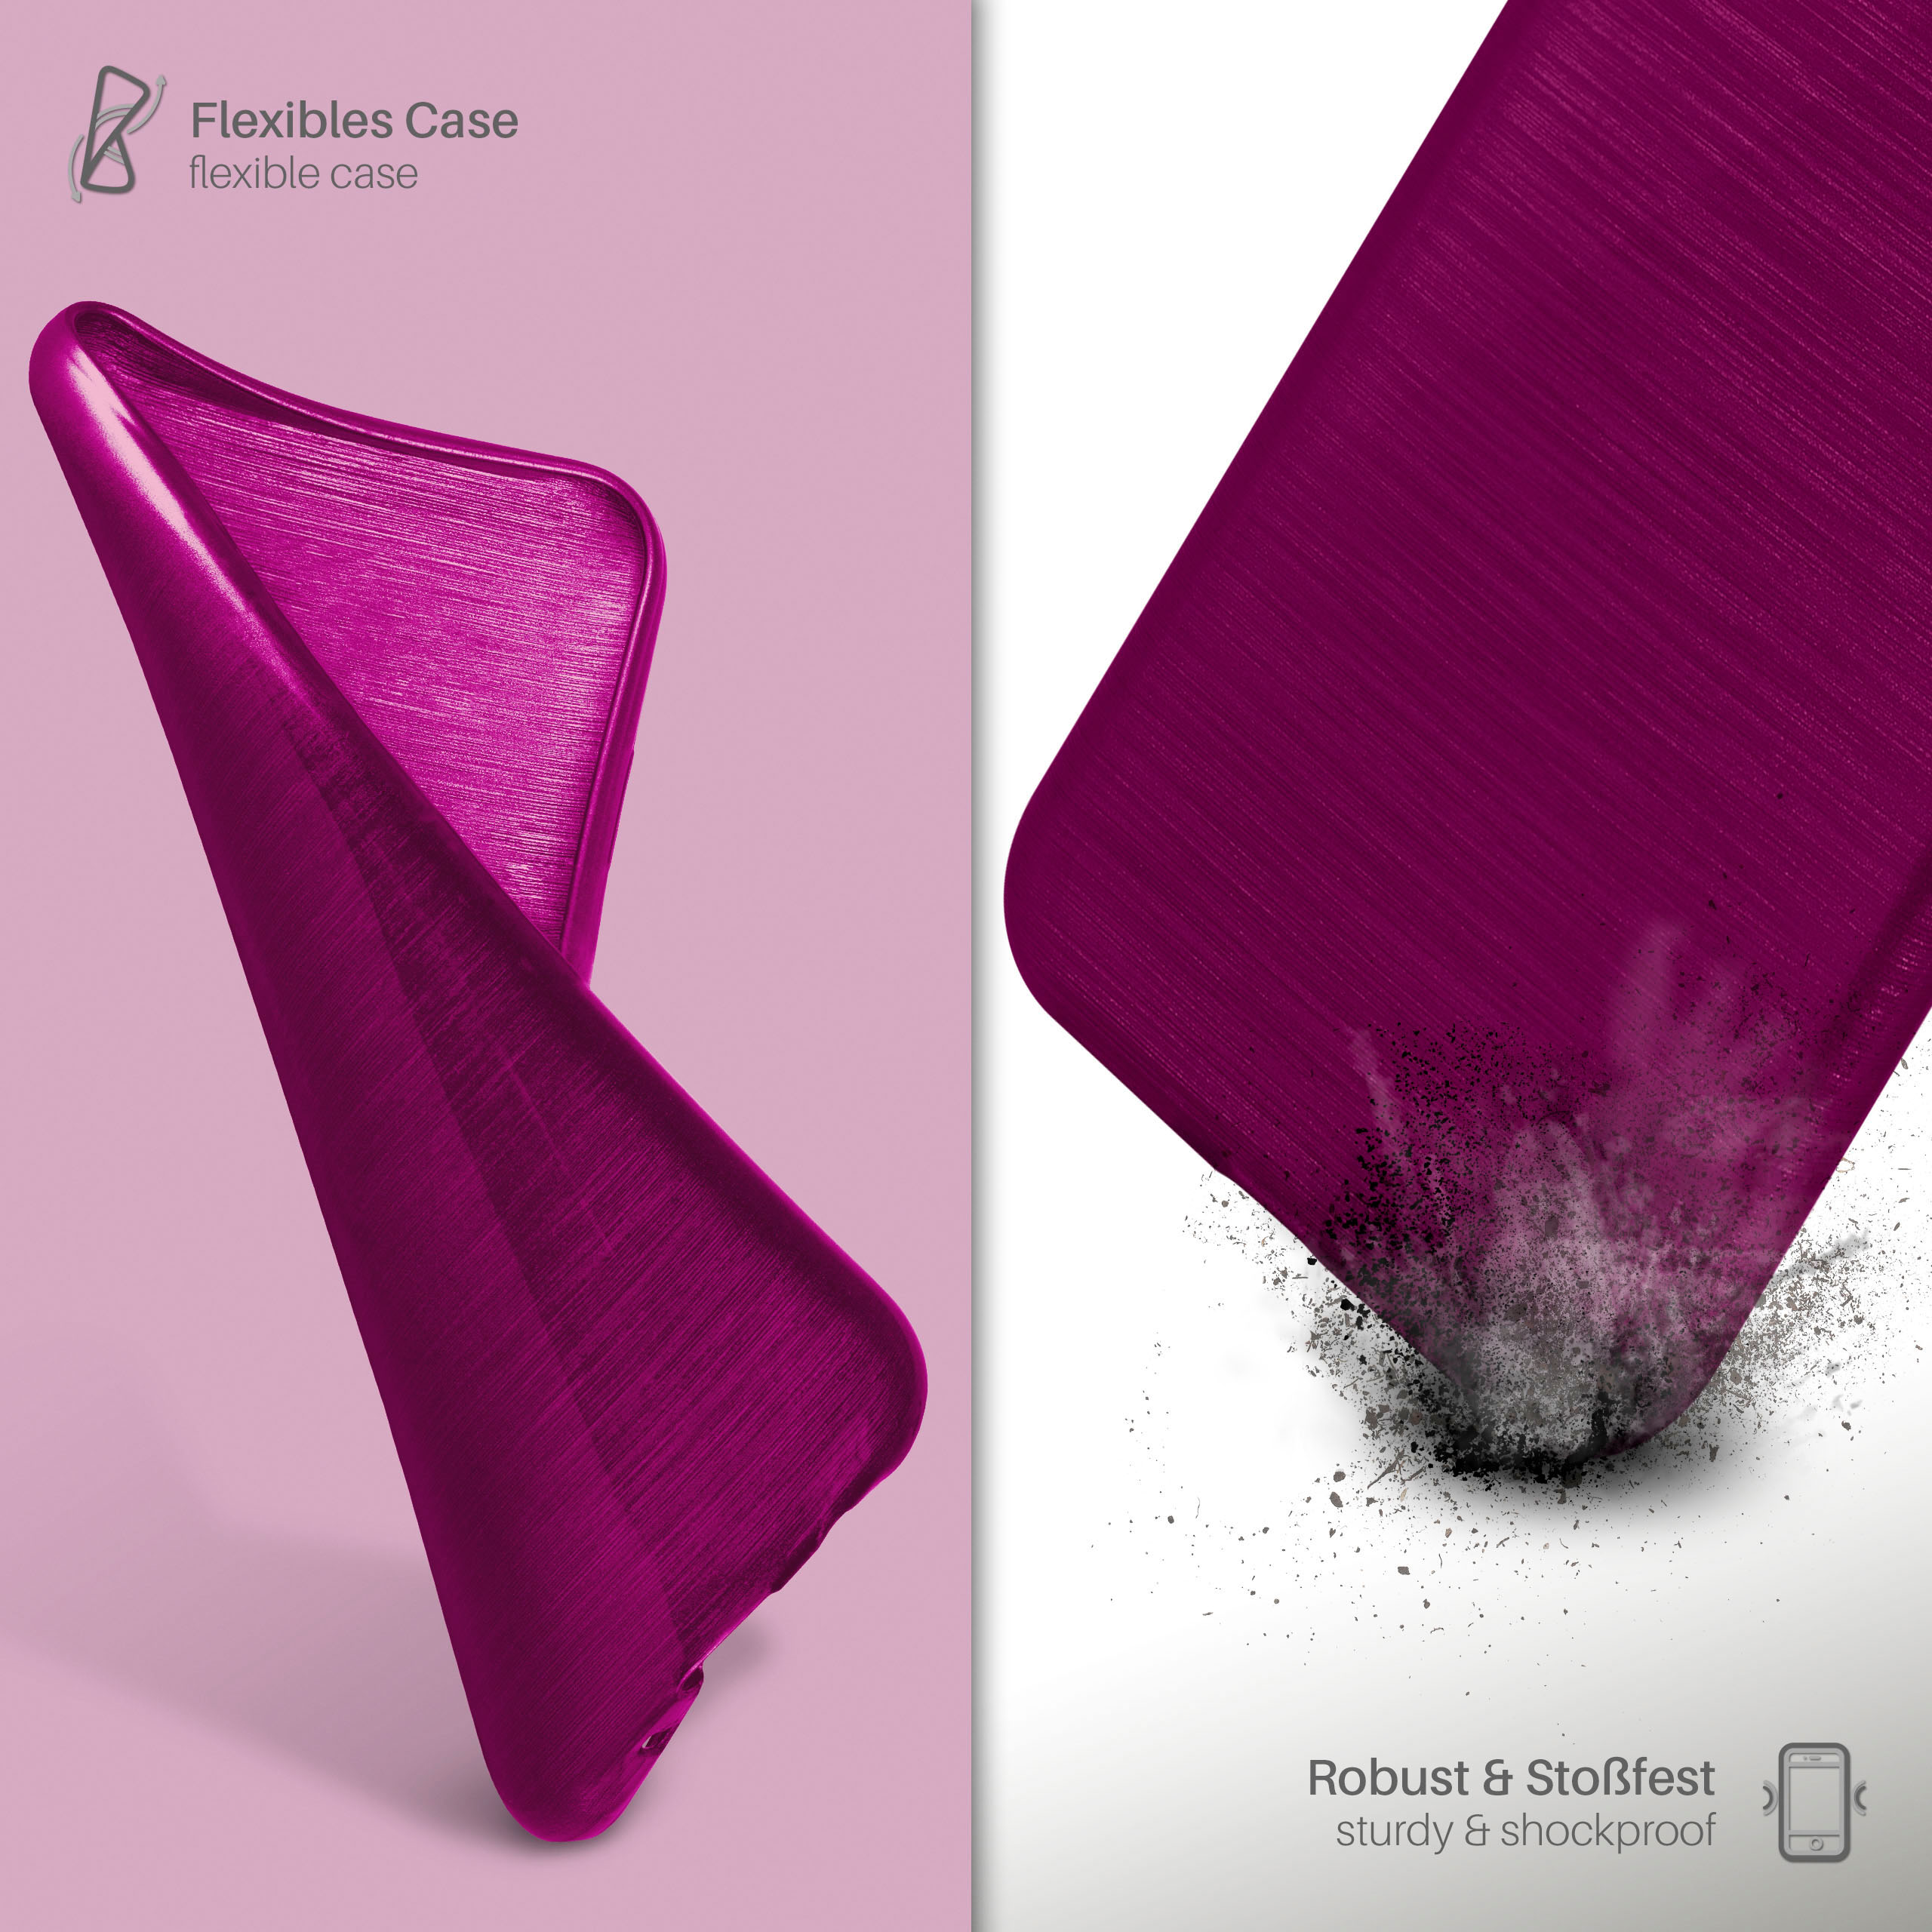 MOEX Brushed Case, Backcover, Purpure-Purple Samsung, S2 S2 Galaxy / Plus